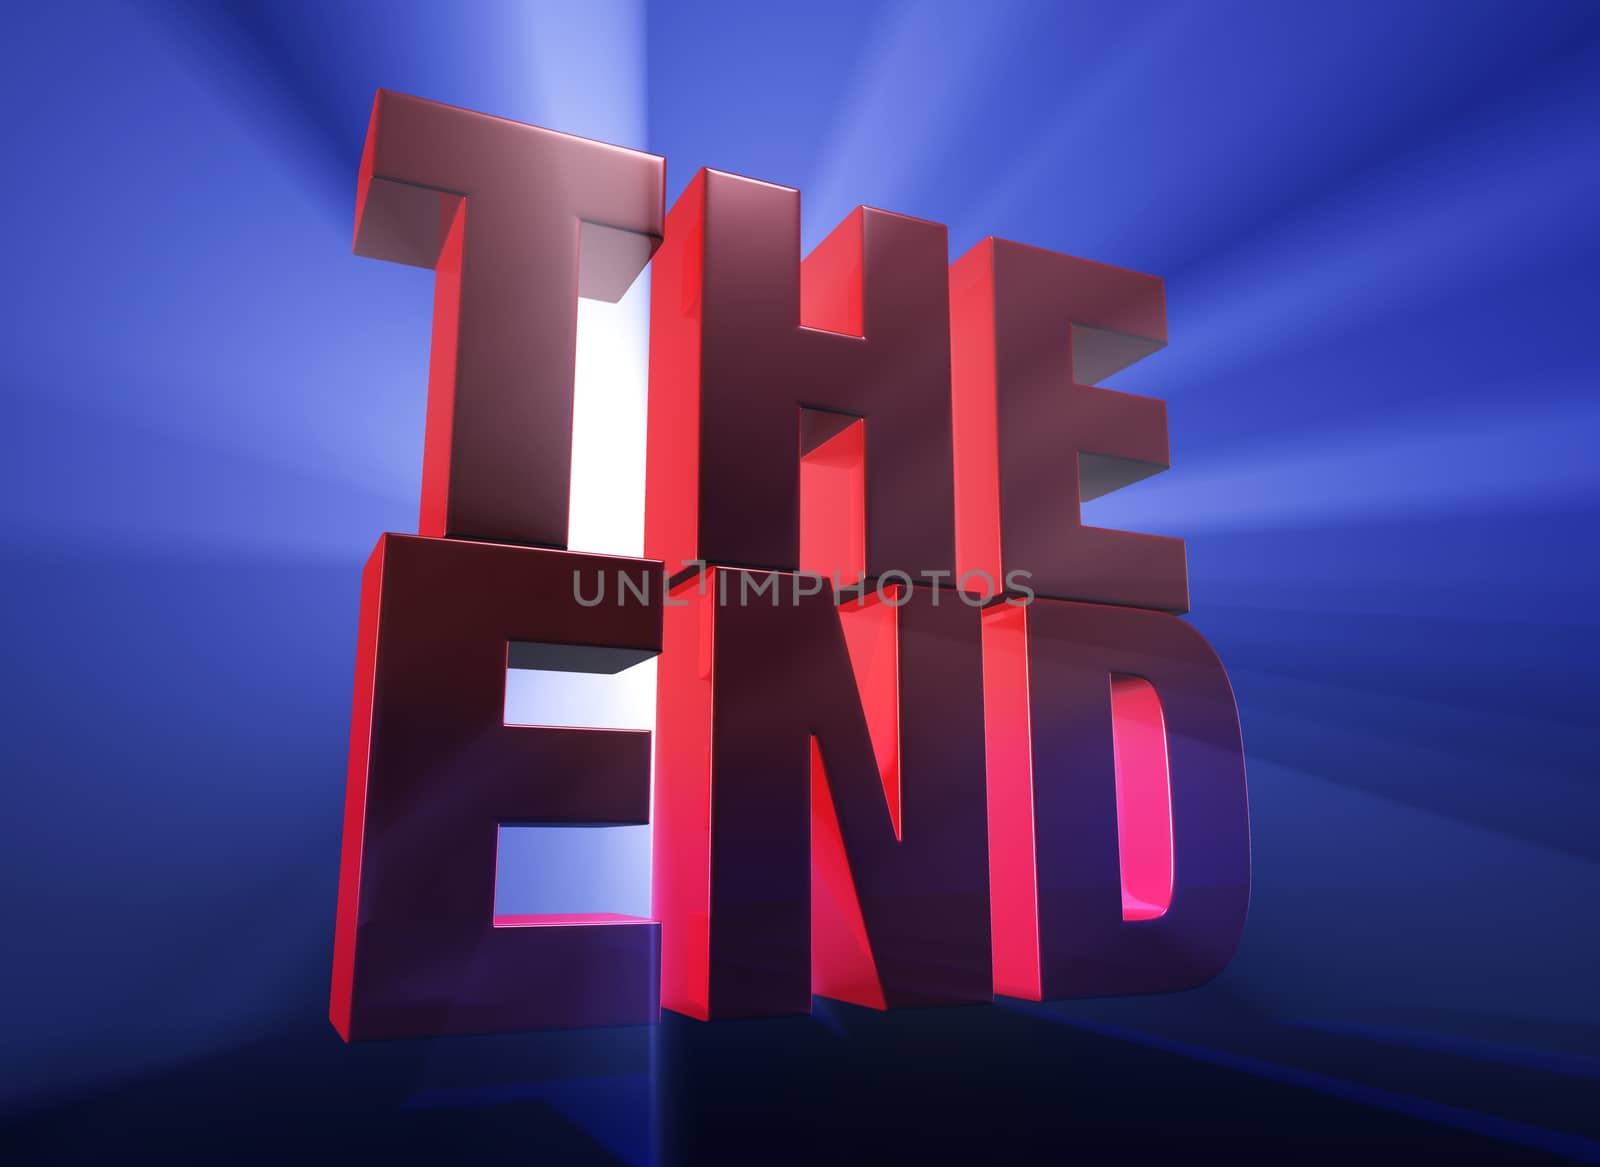 Viewed at a dramatic angle, a bold, red "THE END" stands on a dark blue background brilliantly backlit with light rays shining through.